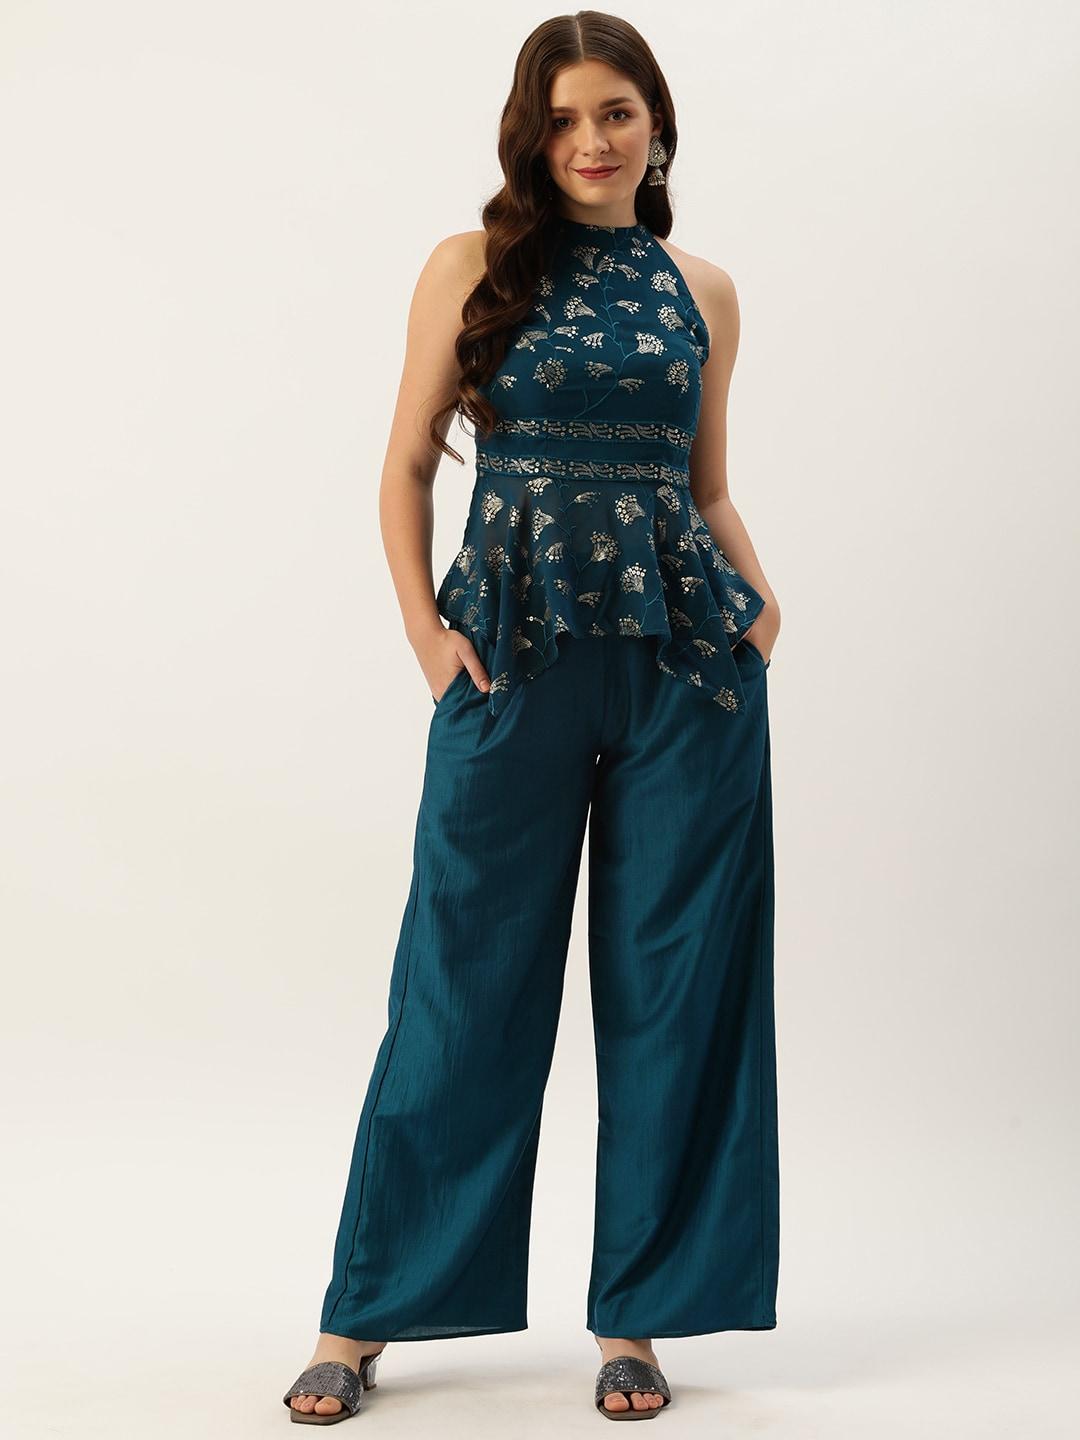 ethnovogue-made-to-measure-teal-blue-&-gold-floral-embroidered-sequinned-co-ord-set